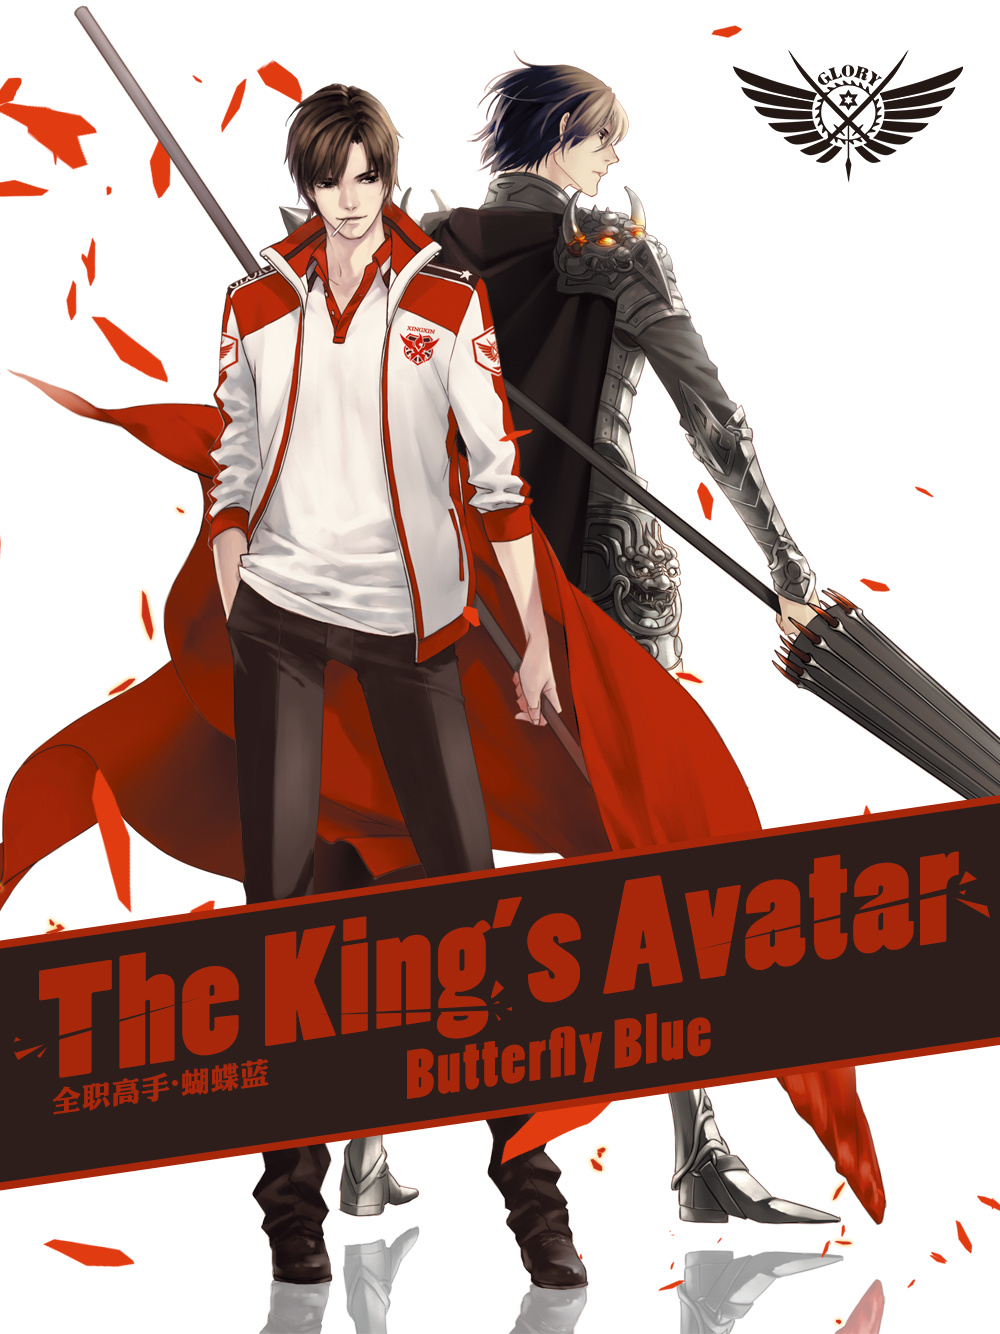 Chinese Drama The King's Avatar 全職高手 (VOL.1- 40 End) English